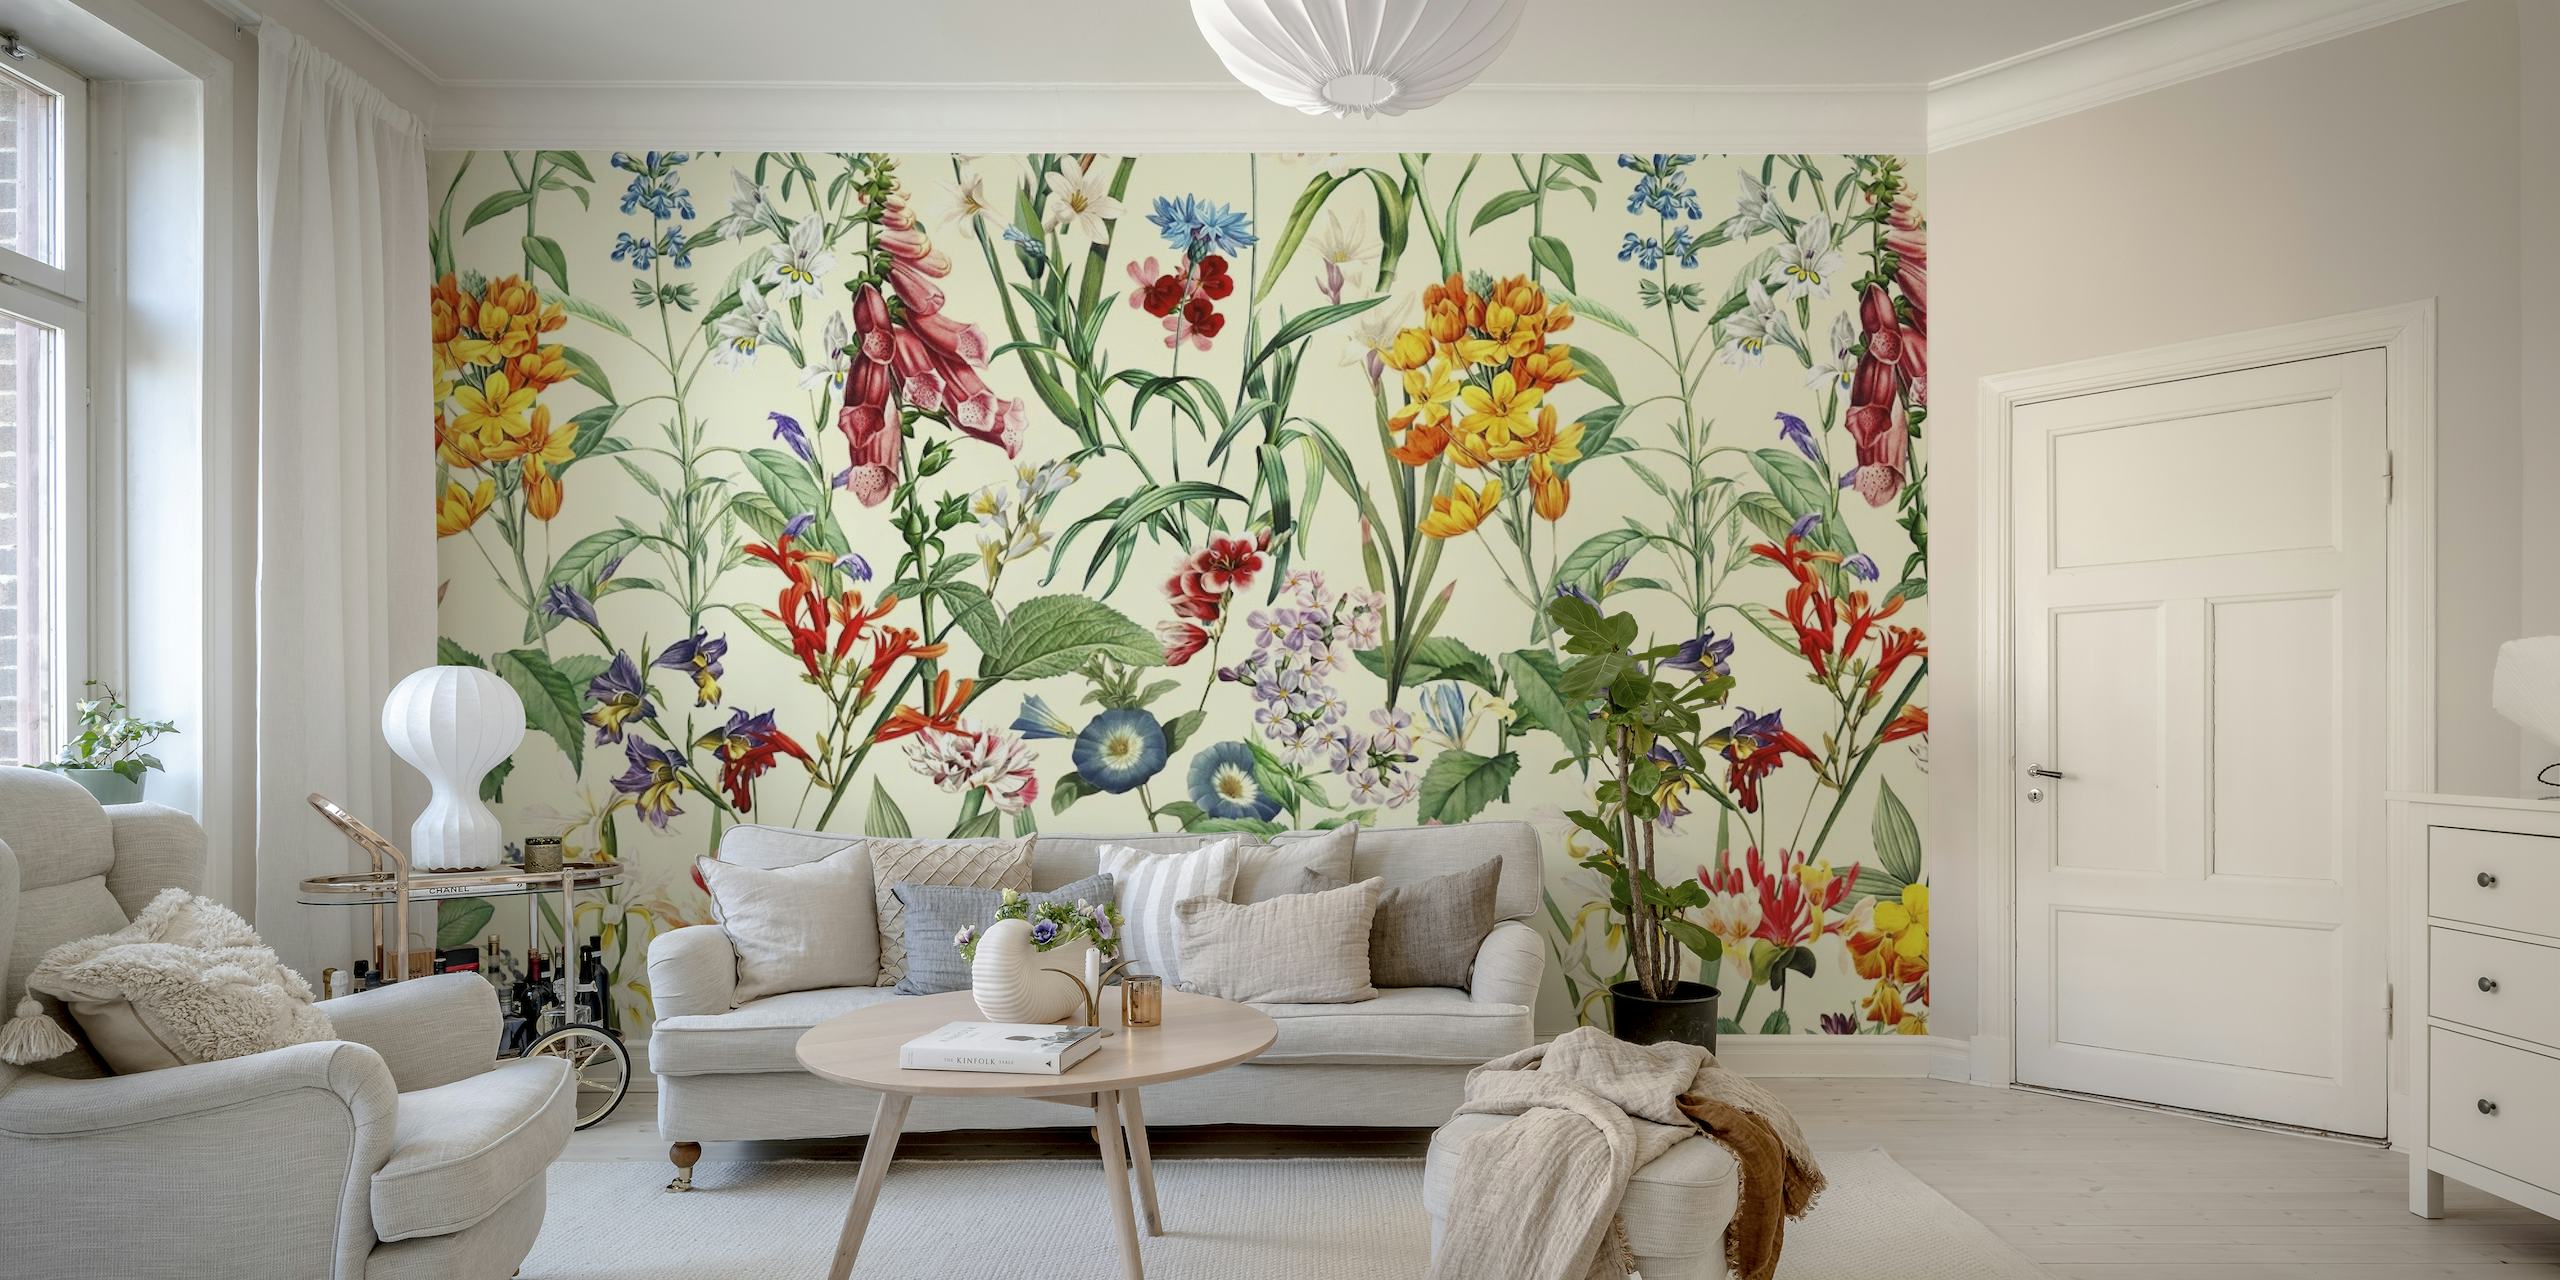 Colorful floral wall mural 'Magical Garden XXIII' with assorted vibrant flowers and greenery